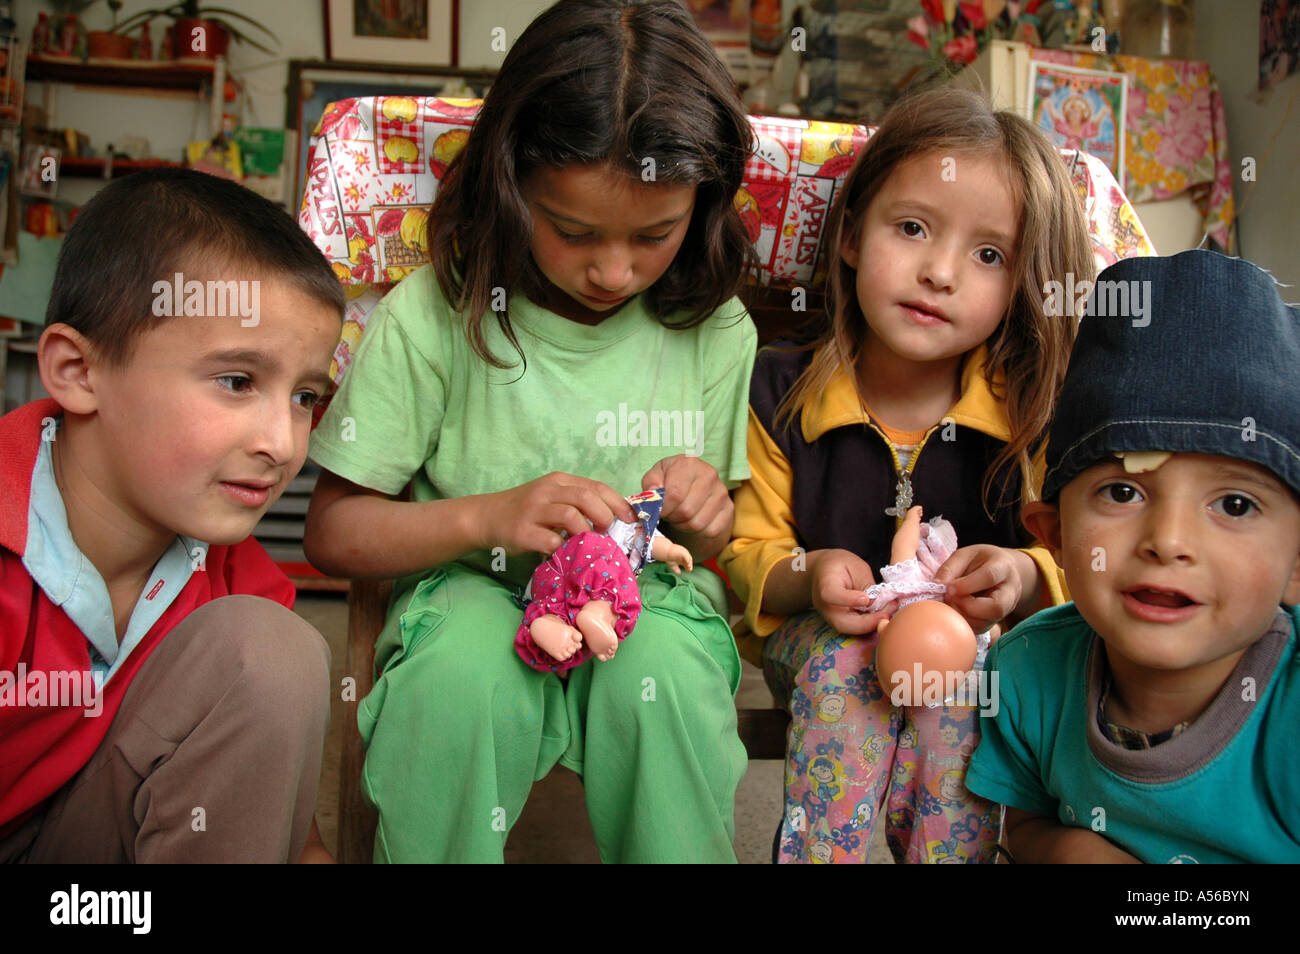 Painet iy8310 children kids colombia sisters playing dolls slum altos cazuca bogota photo 2005 country developing nation Stock Photo